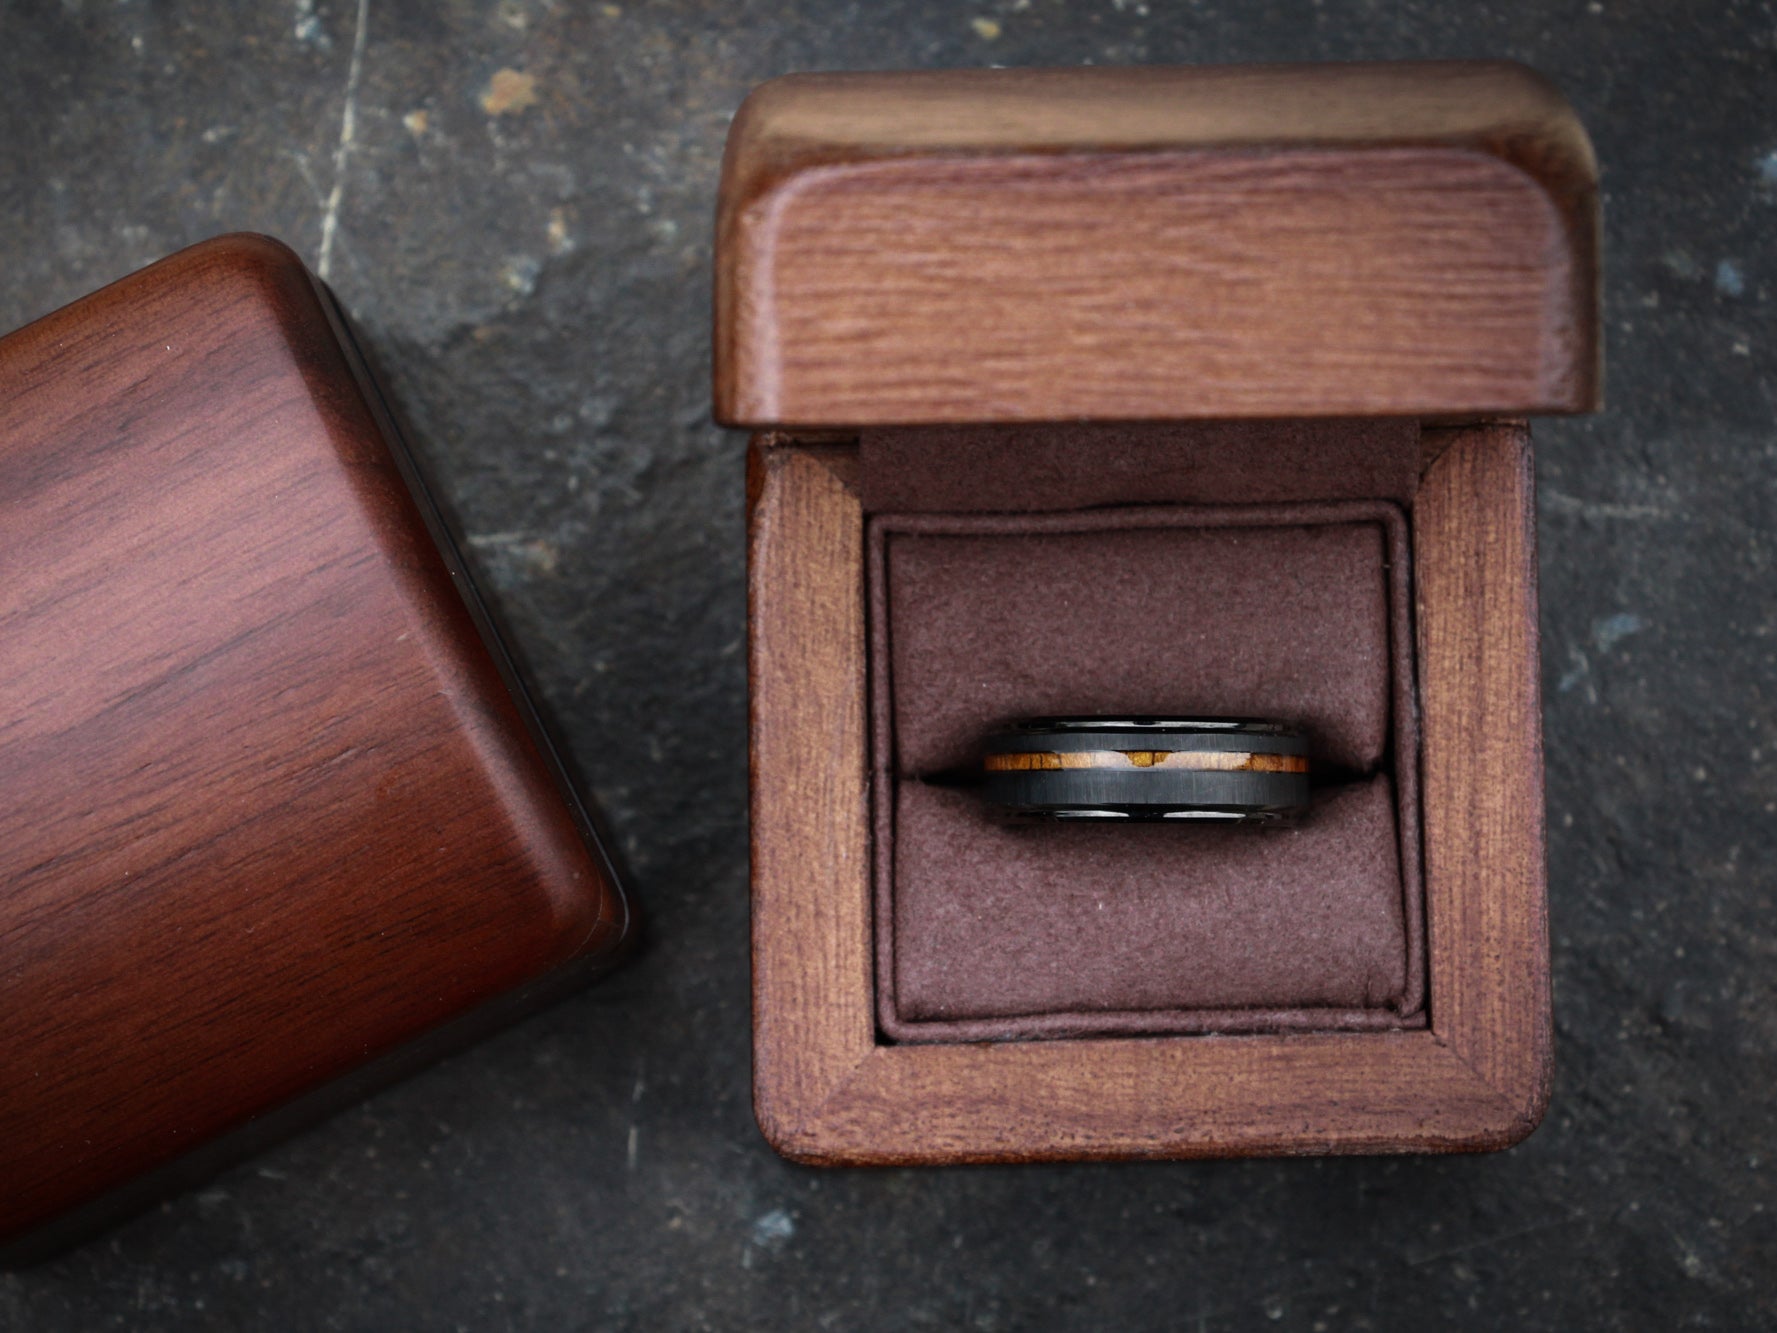 Tungsten Ring Wood Box Photo 8mm black classic wood wedding band hand made wooden box